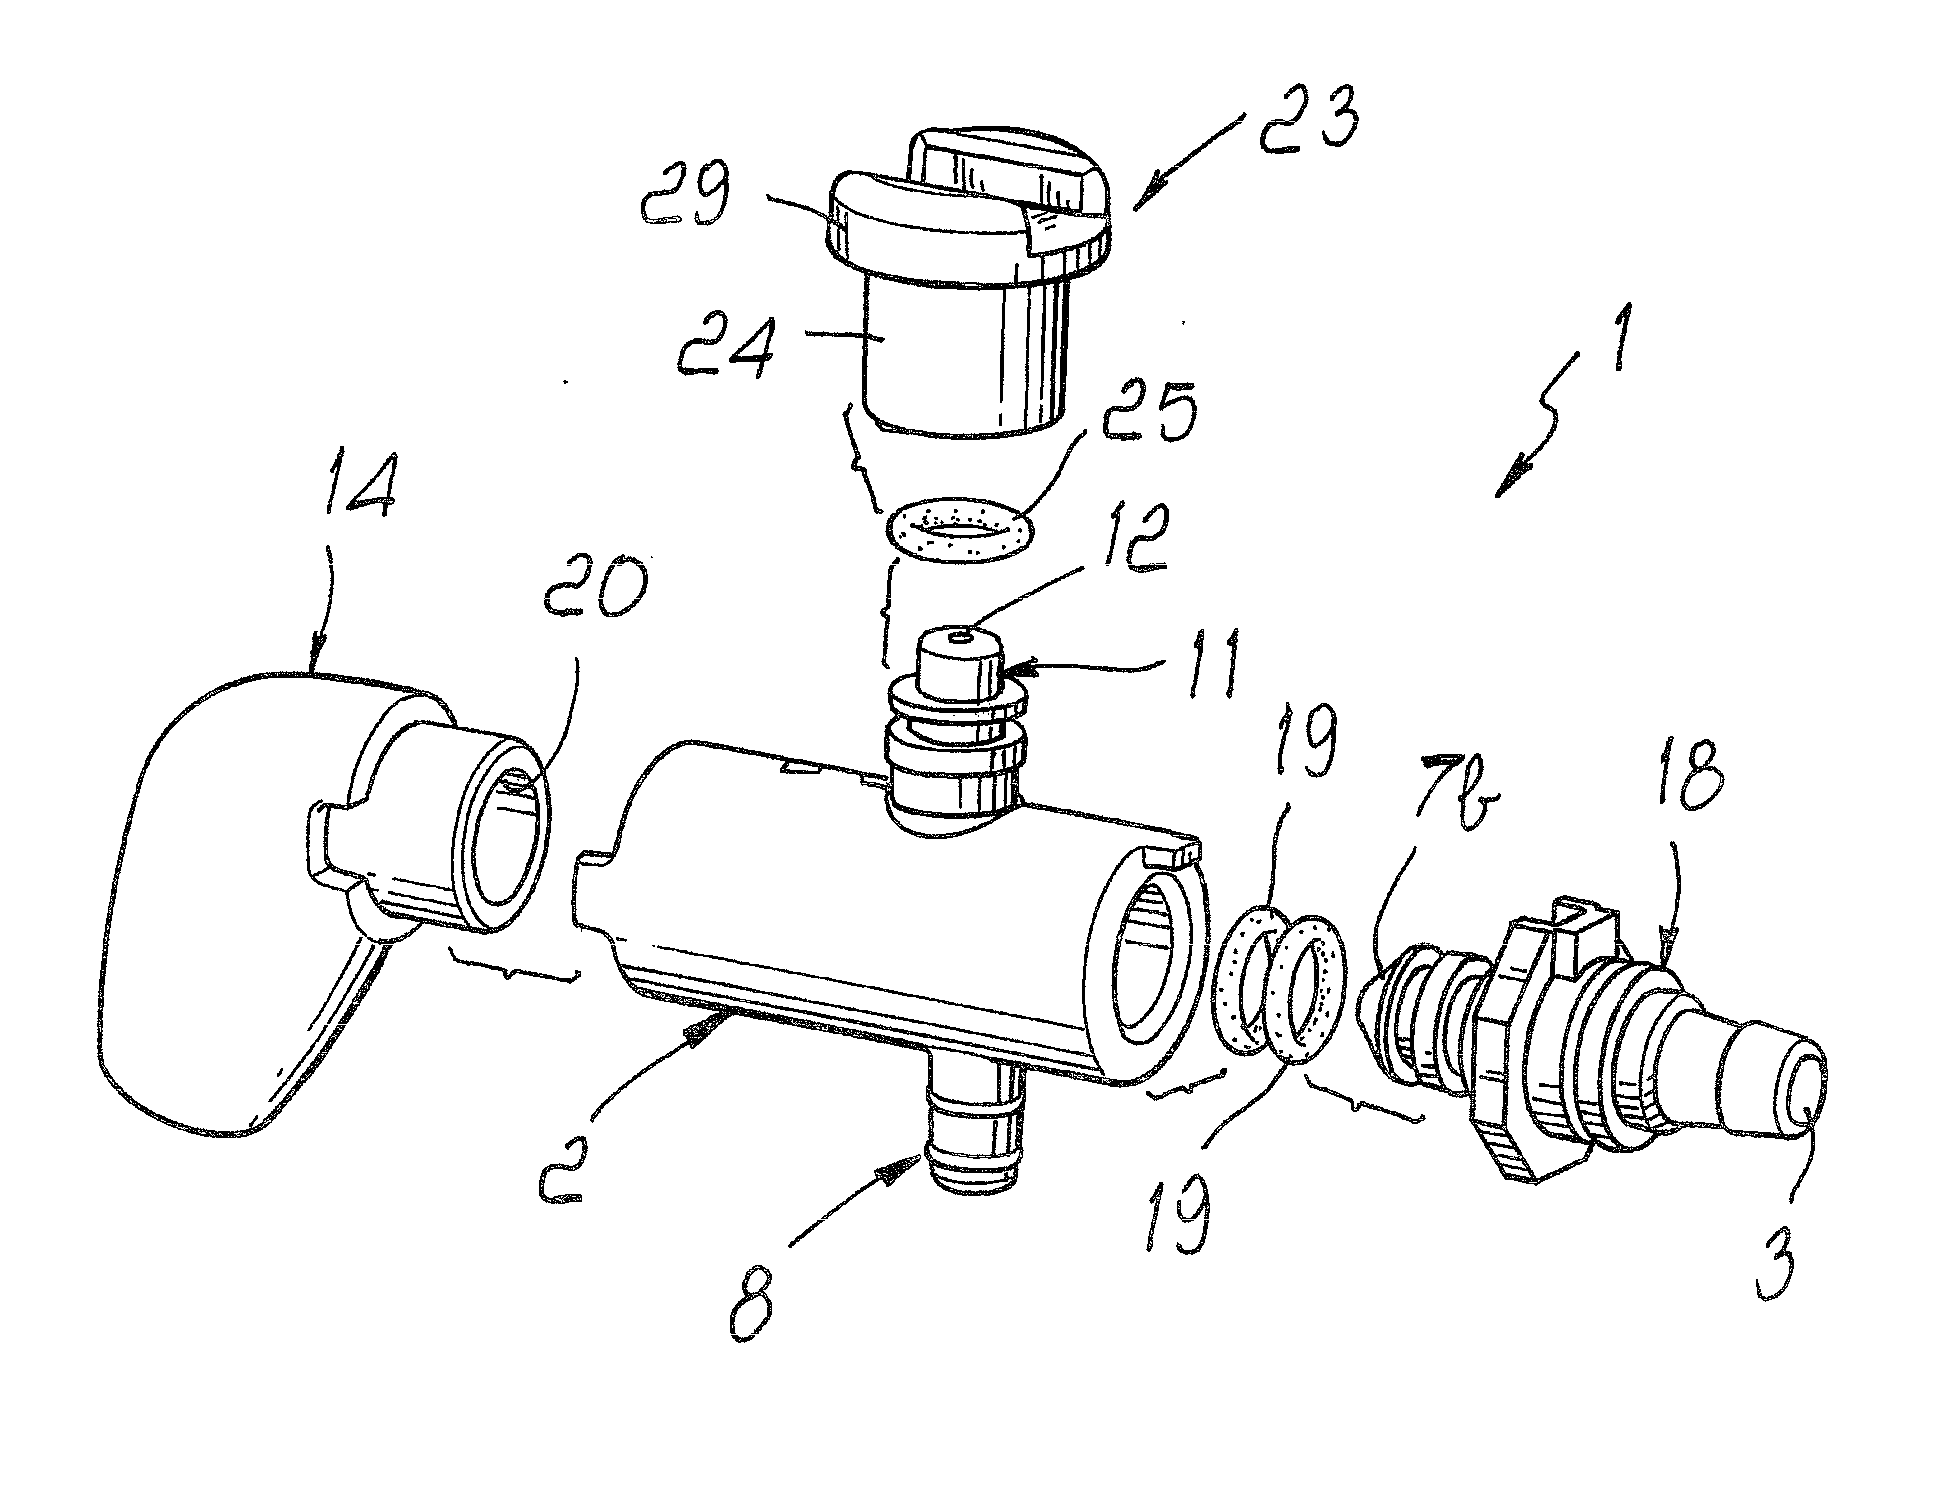 Device for heating and/or frothing milk for machines for preparing hot beverages such as a cappuccino